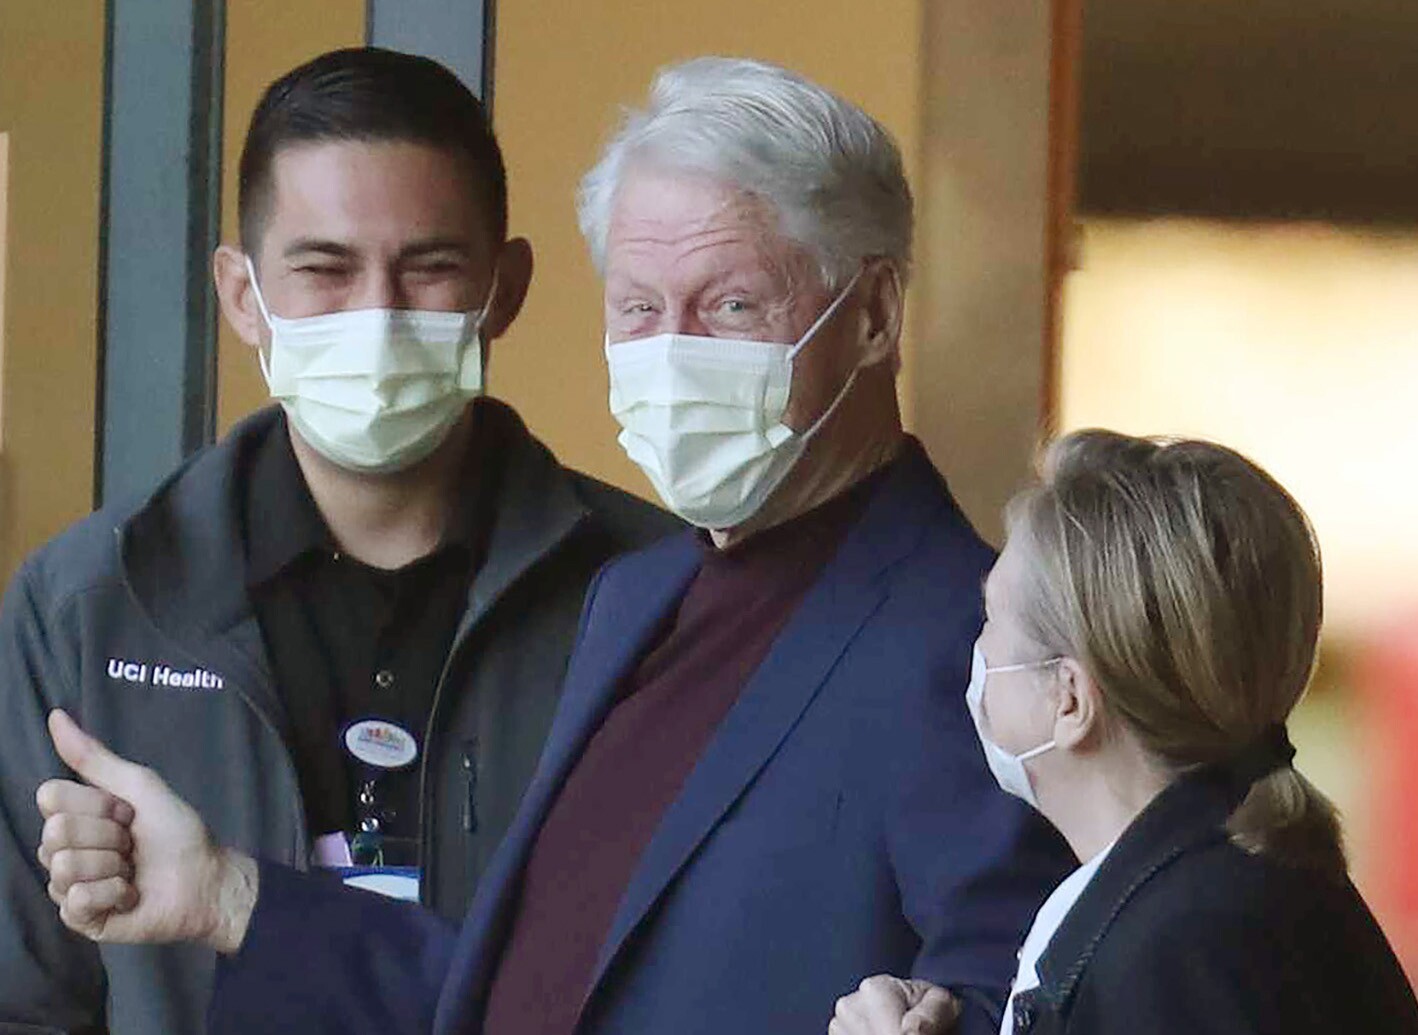 Bill Clinton heads home after spending six days in a California hospital fighting an infection